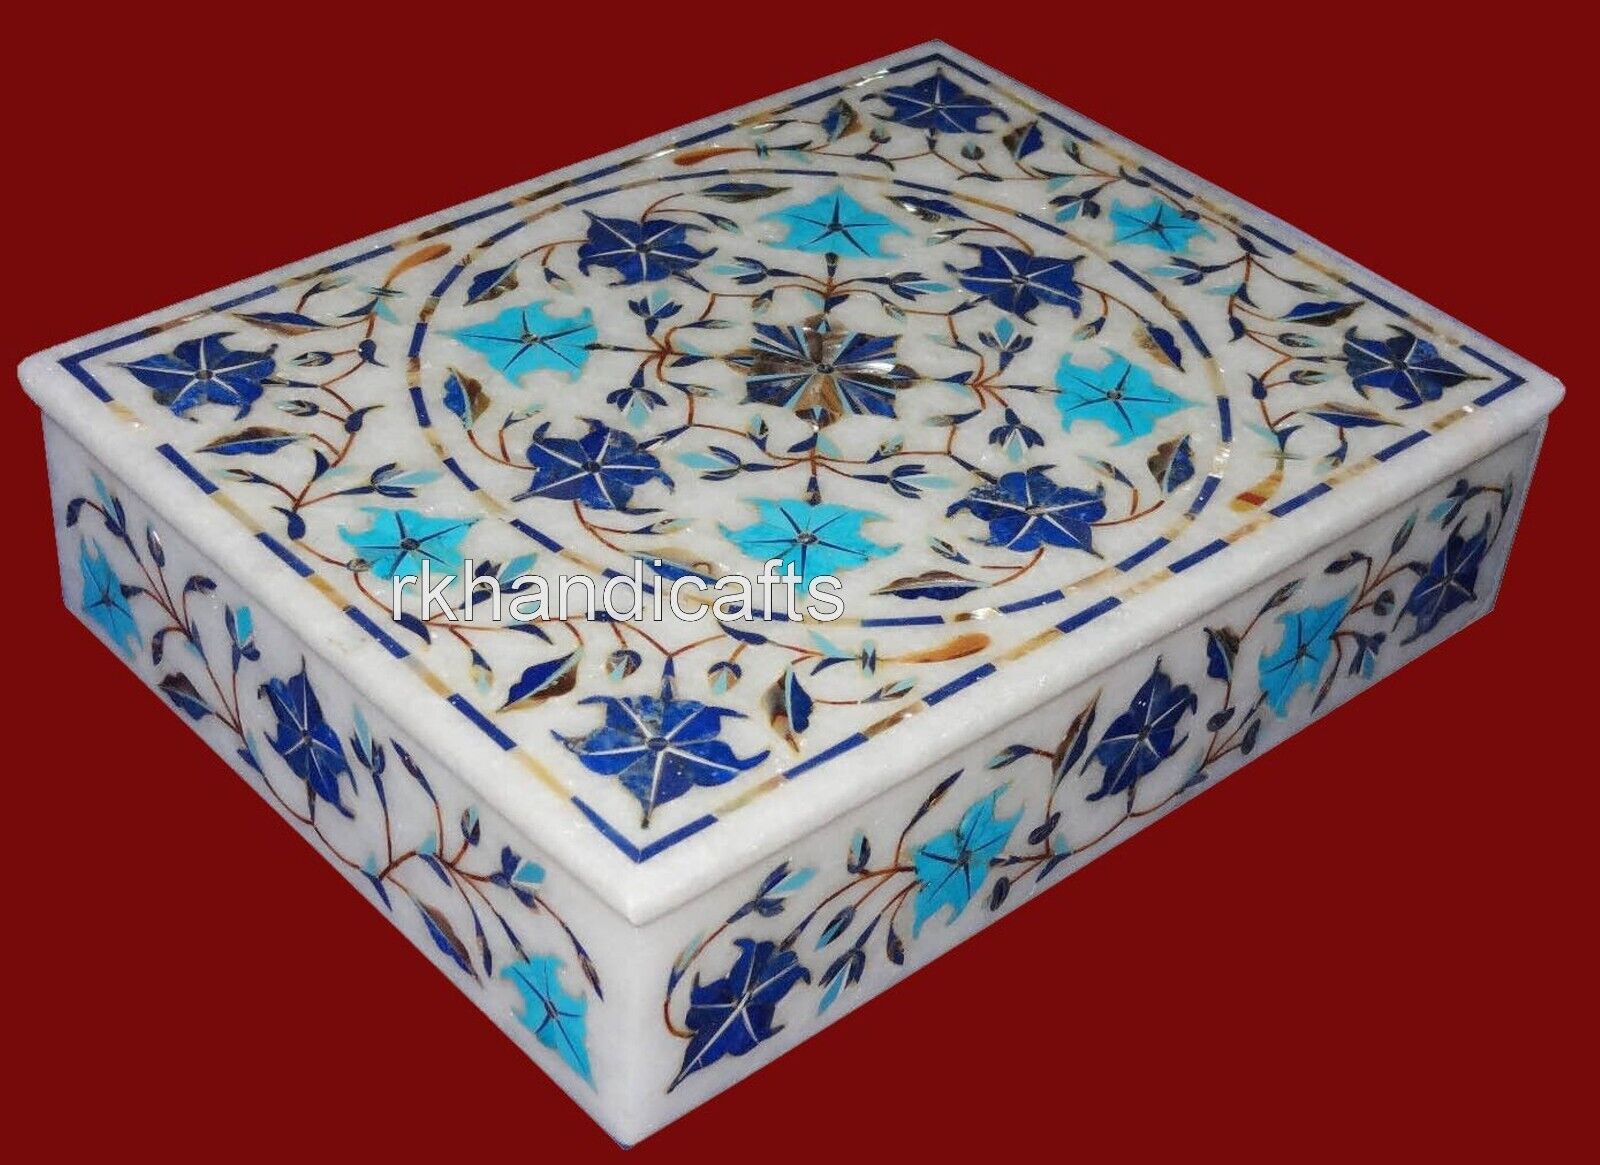 8x6 Inches White Marble Jewelry Box Pietra Dura Art Medicine Box with Royal Look